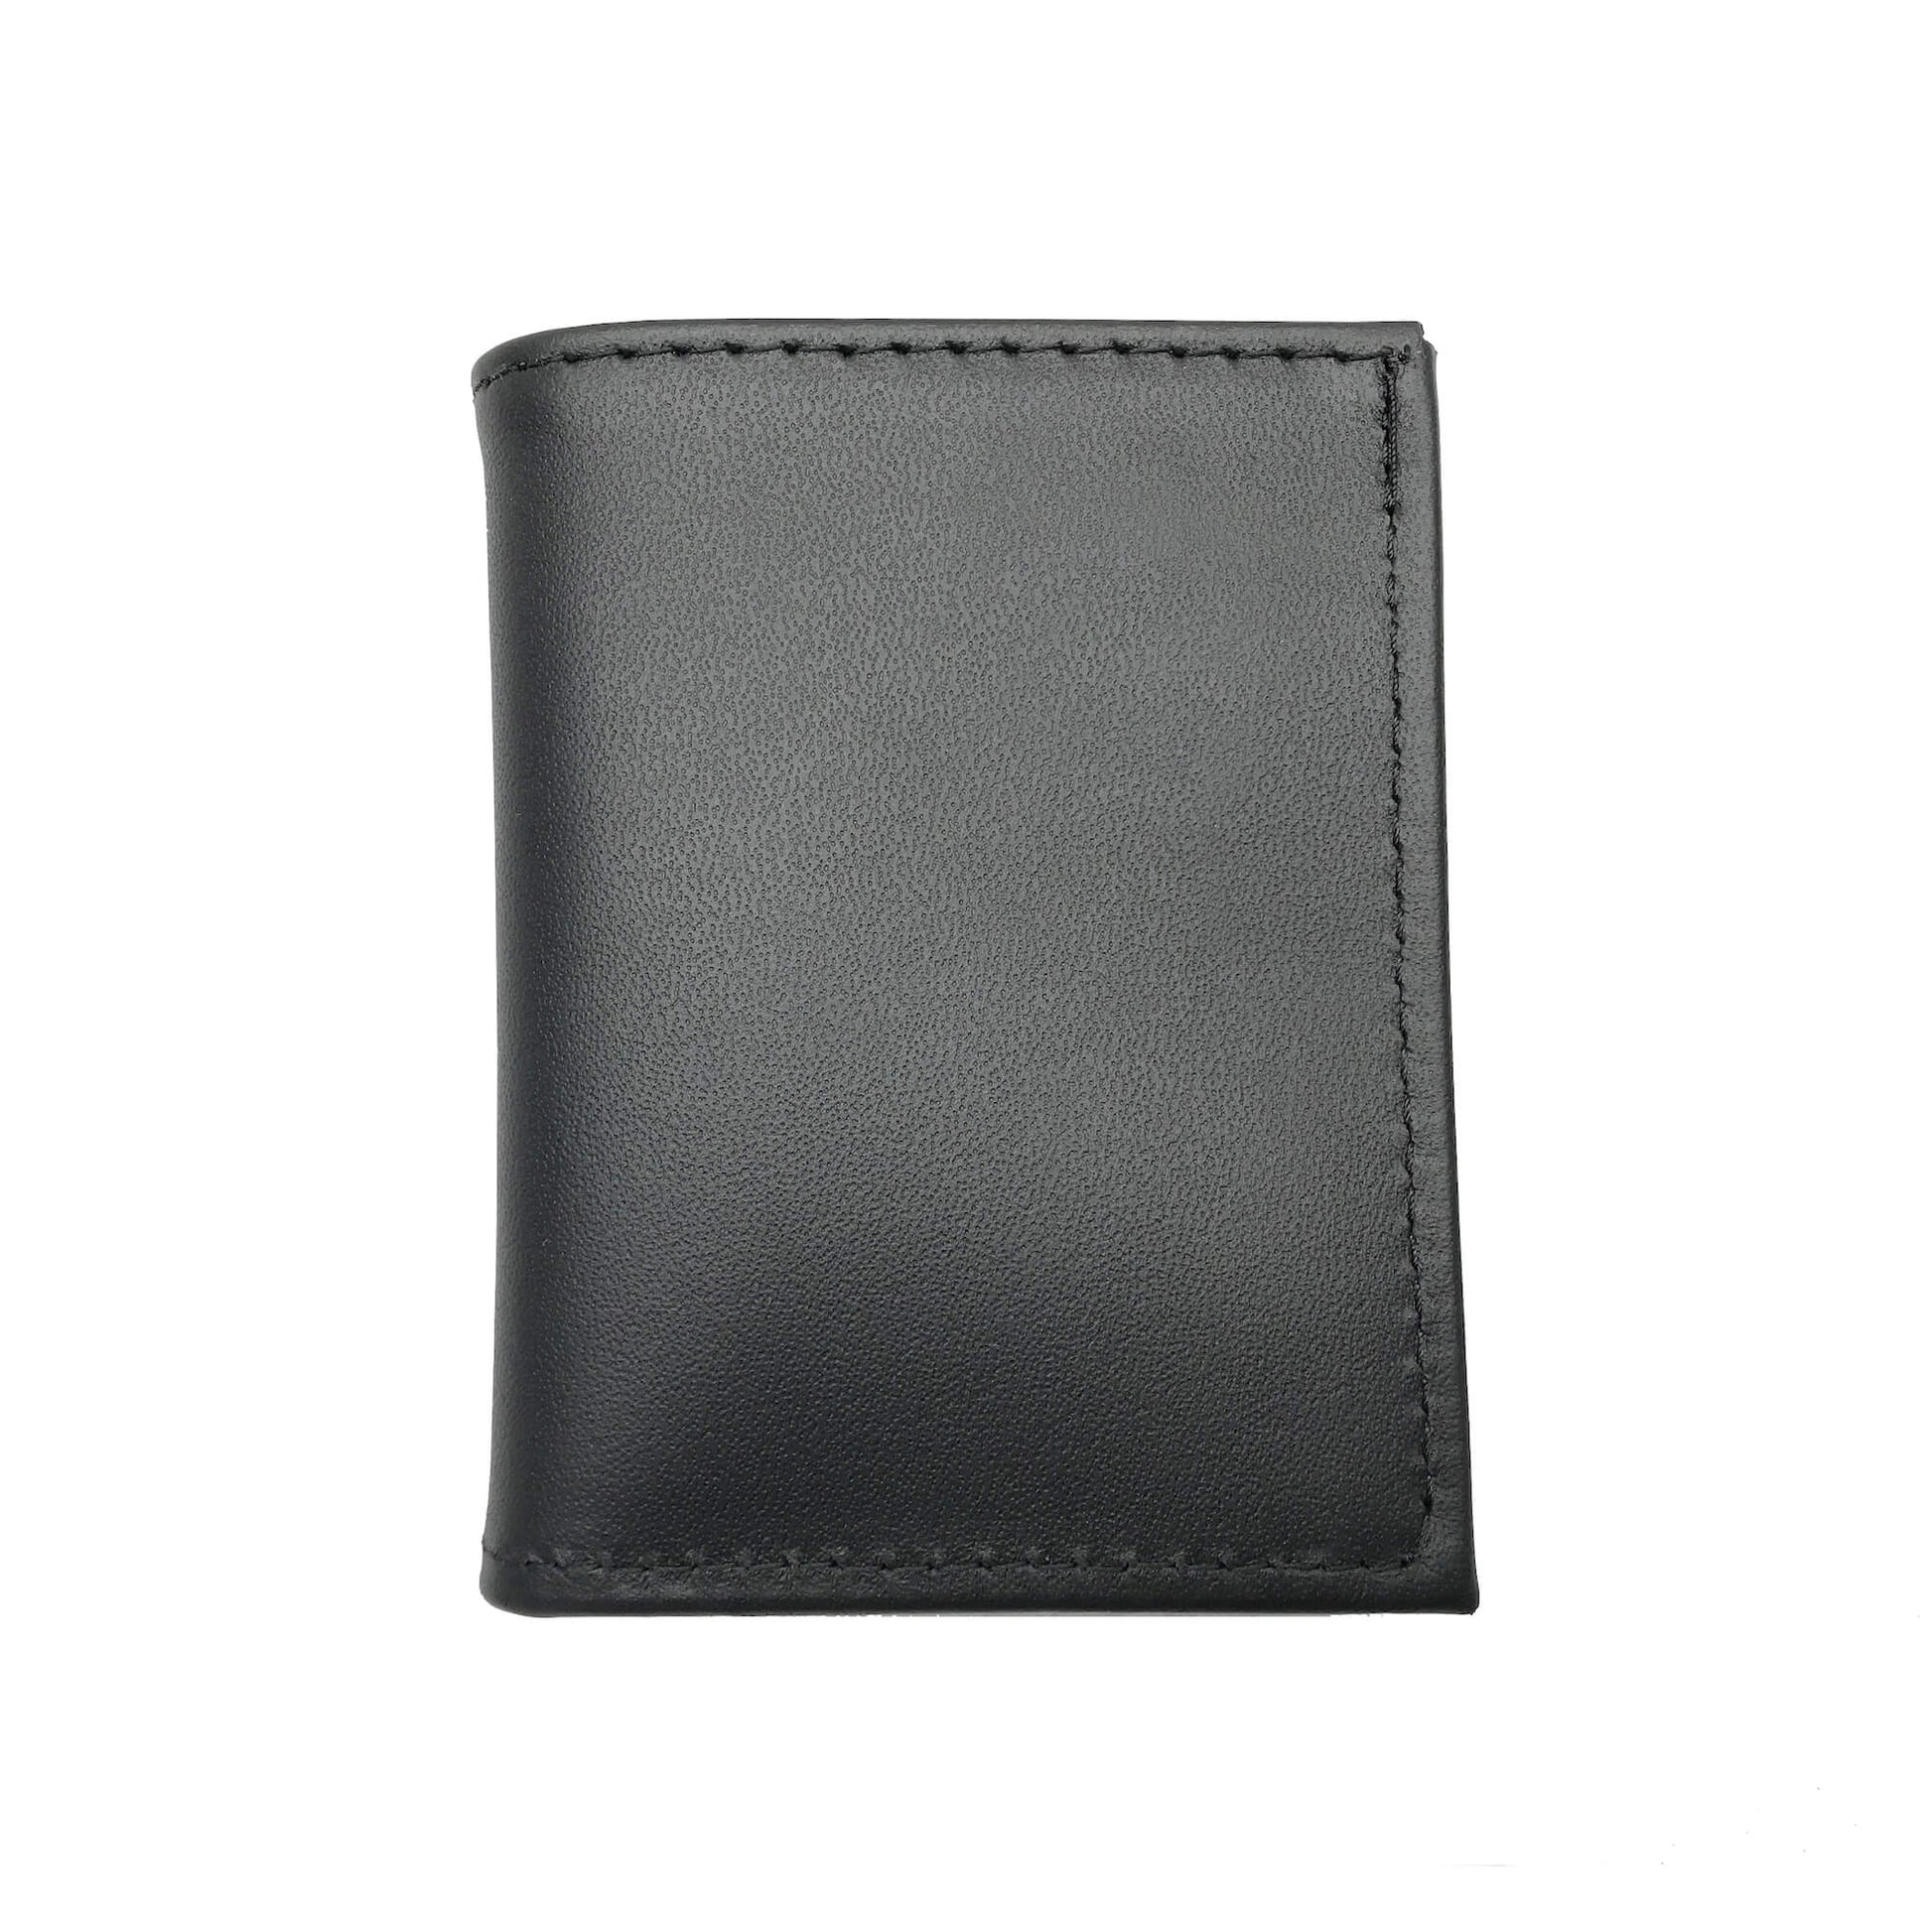 Illinois State Police Single ID Badge Wallet